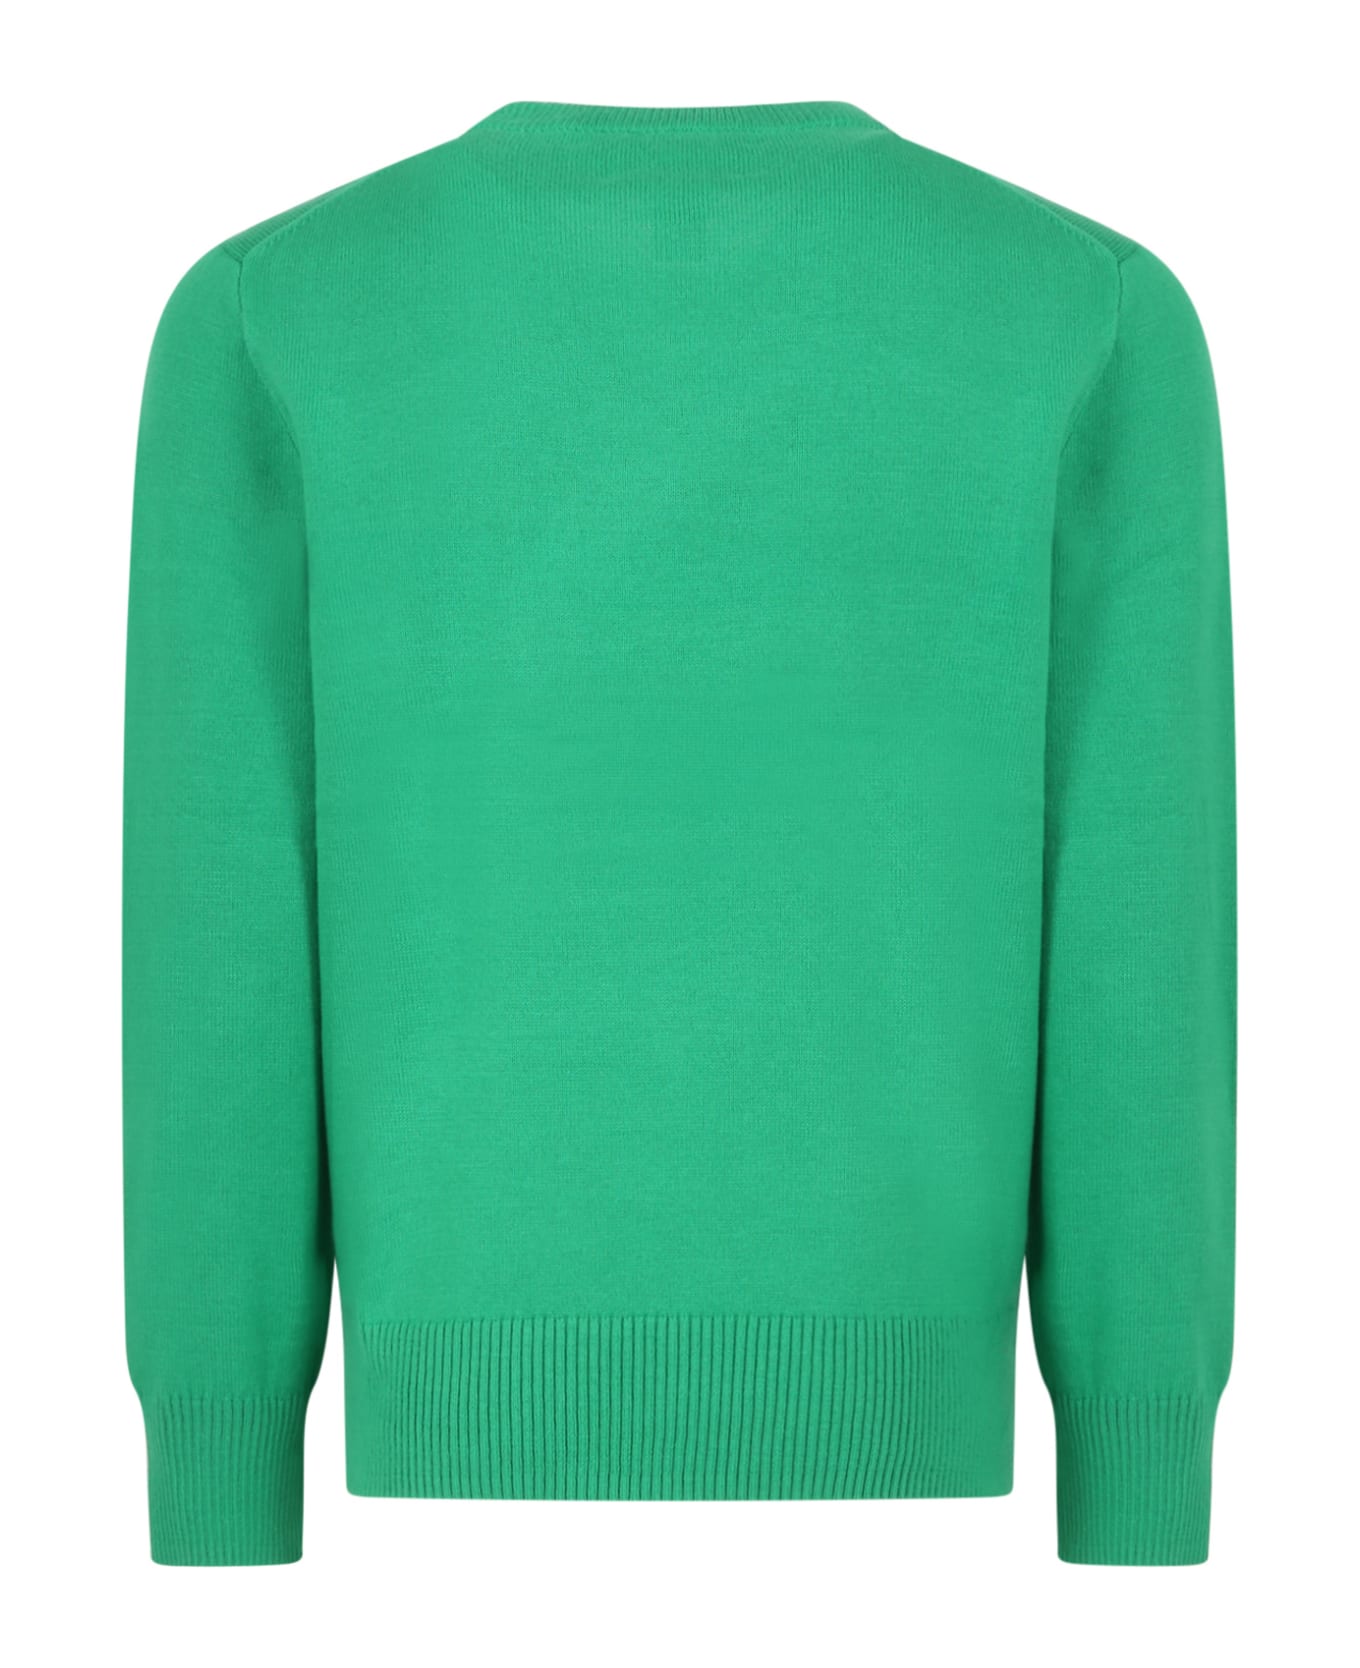 Ralph Lauren Green Sweater For Boy With Blue Pony - Green